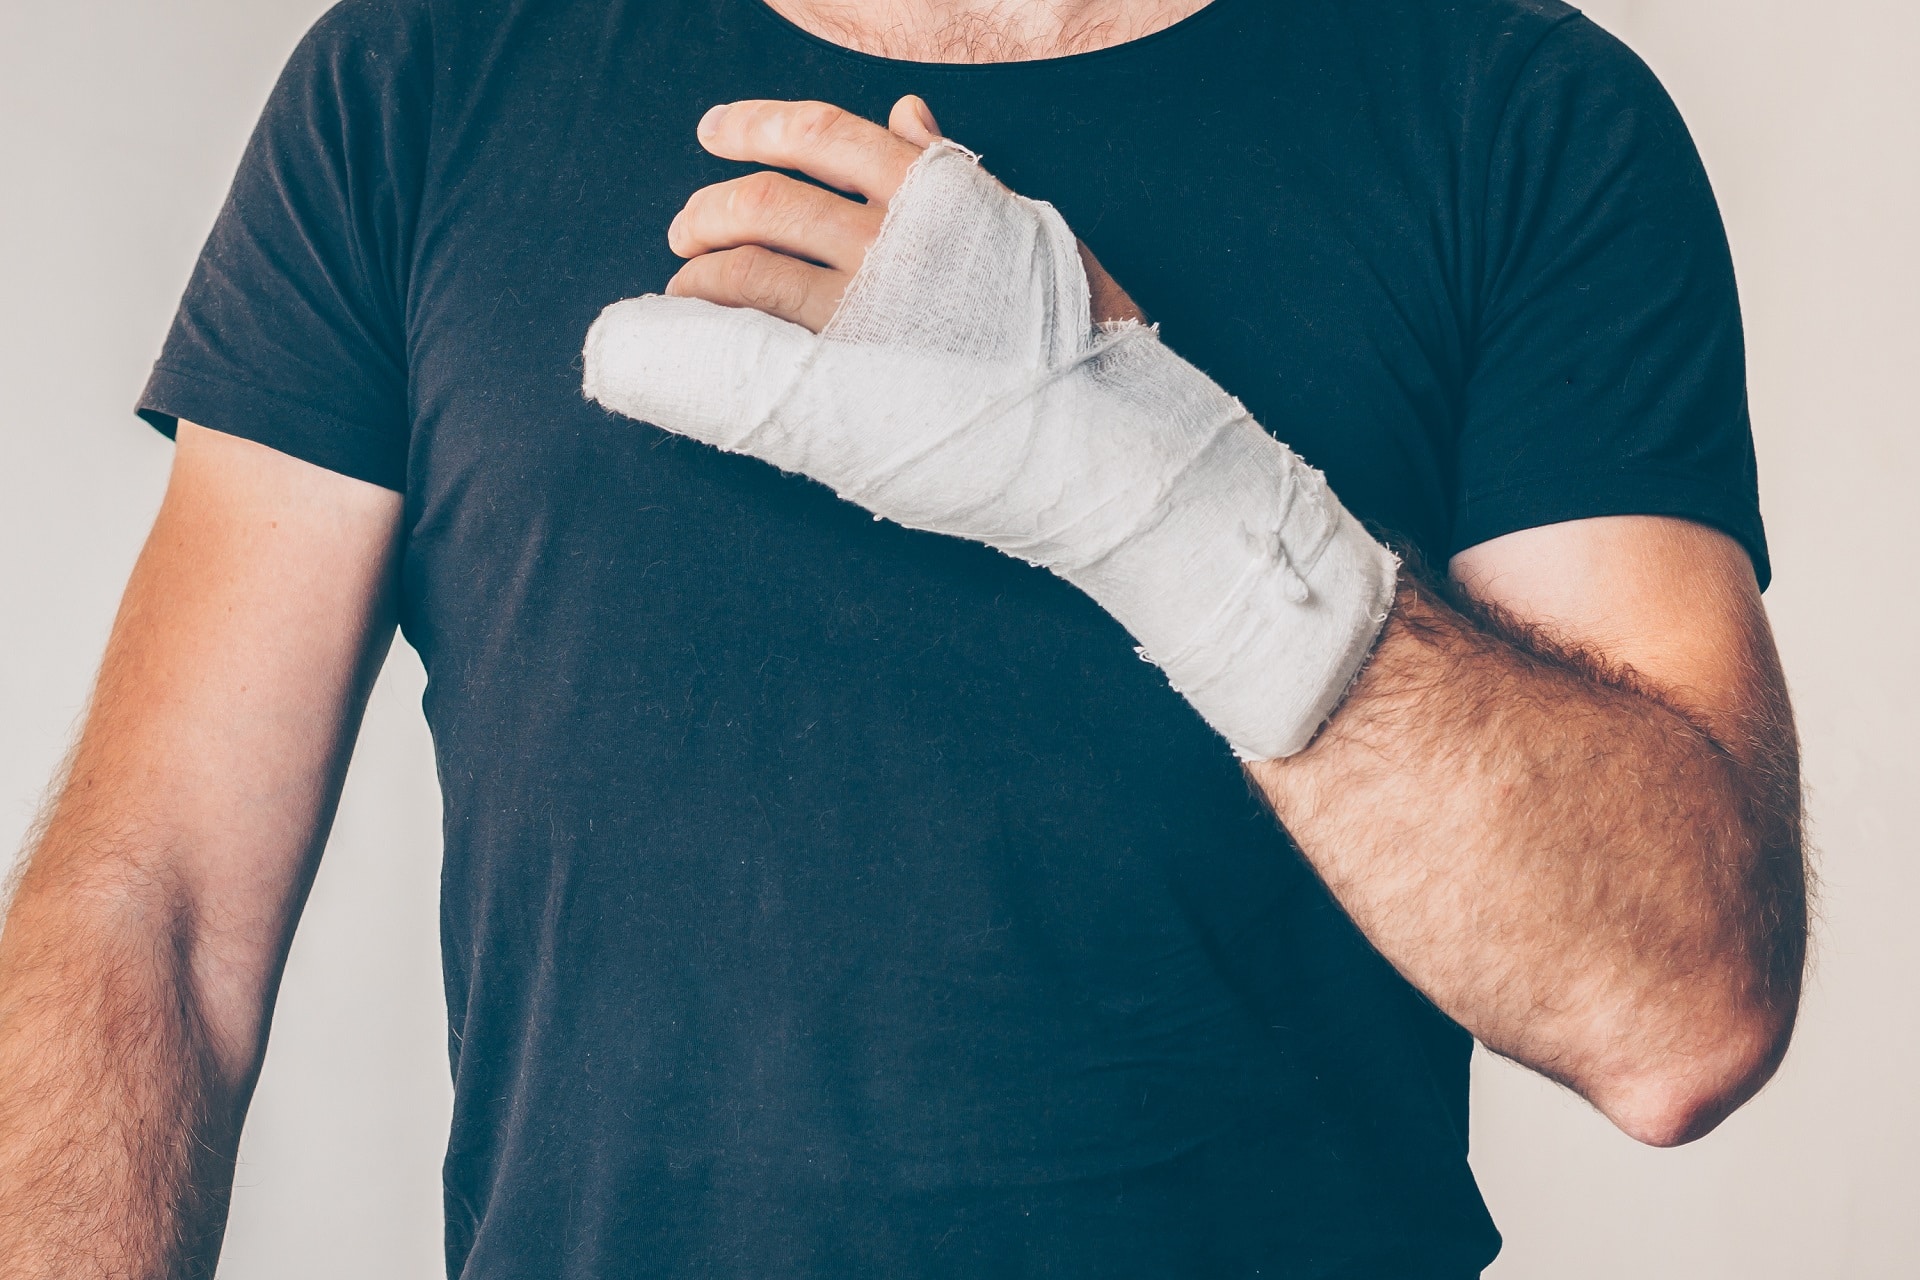 How An Experienced New York Attorney Can Help After A Workplace Injury